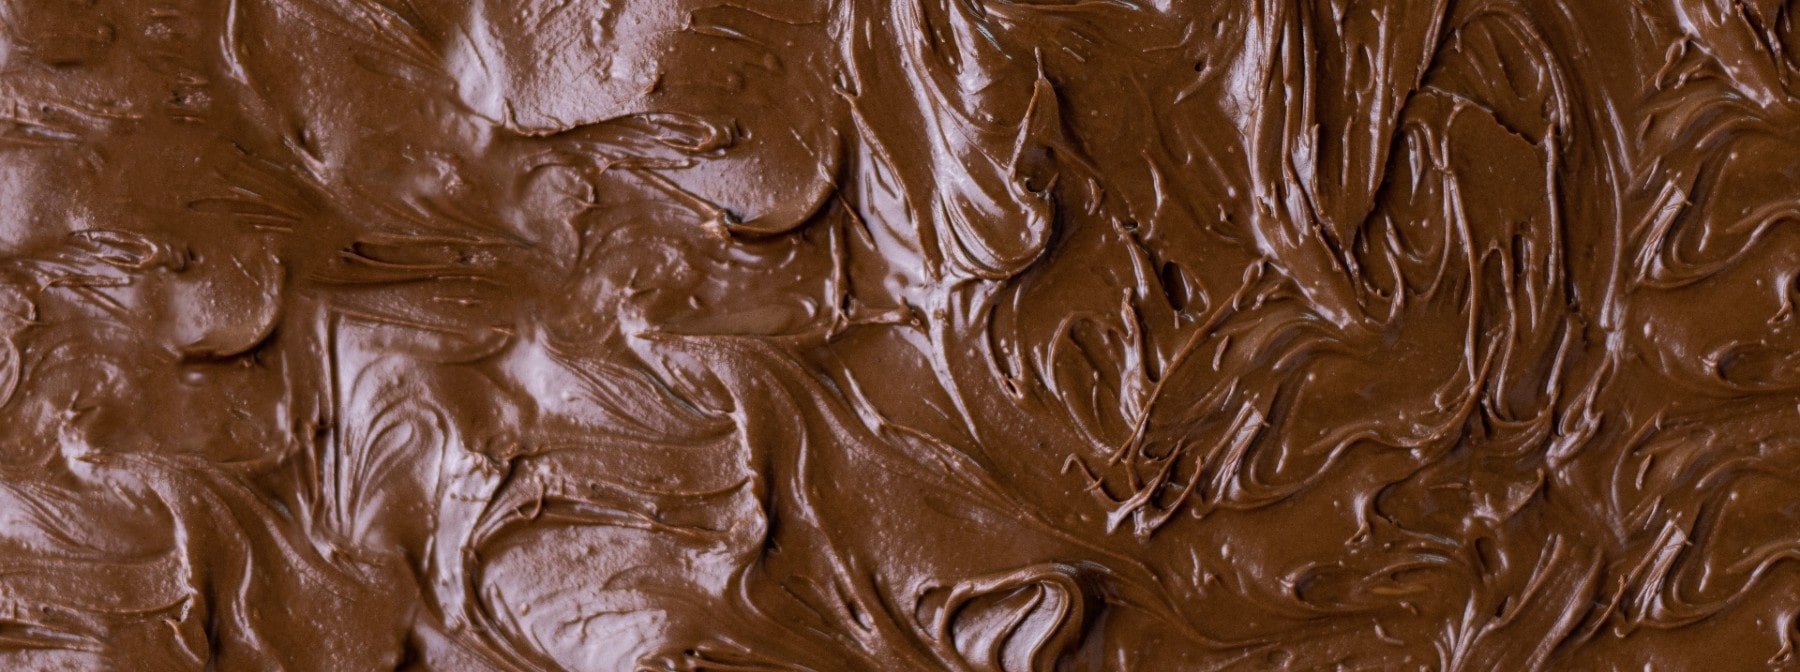 Milk Chocolate In The Morning ‘Did Not Lead To Weight Gain’ Says New Study